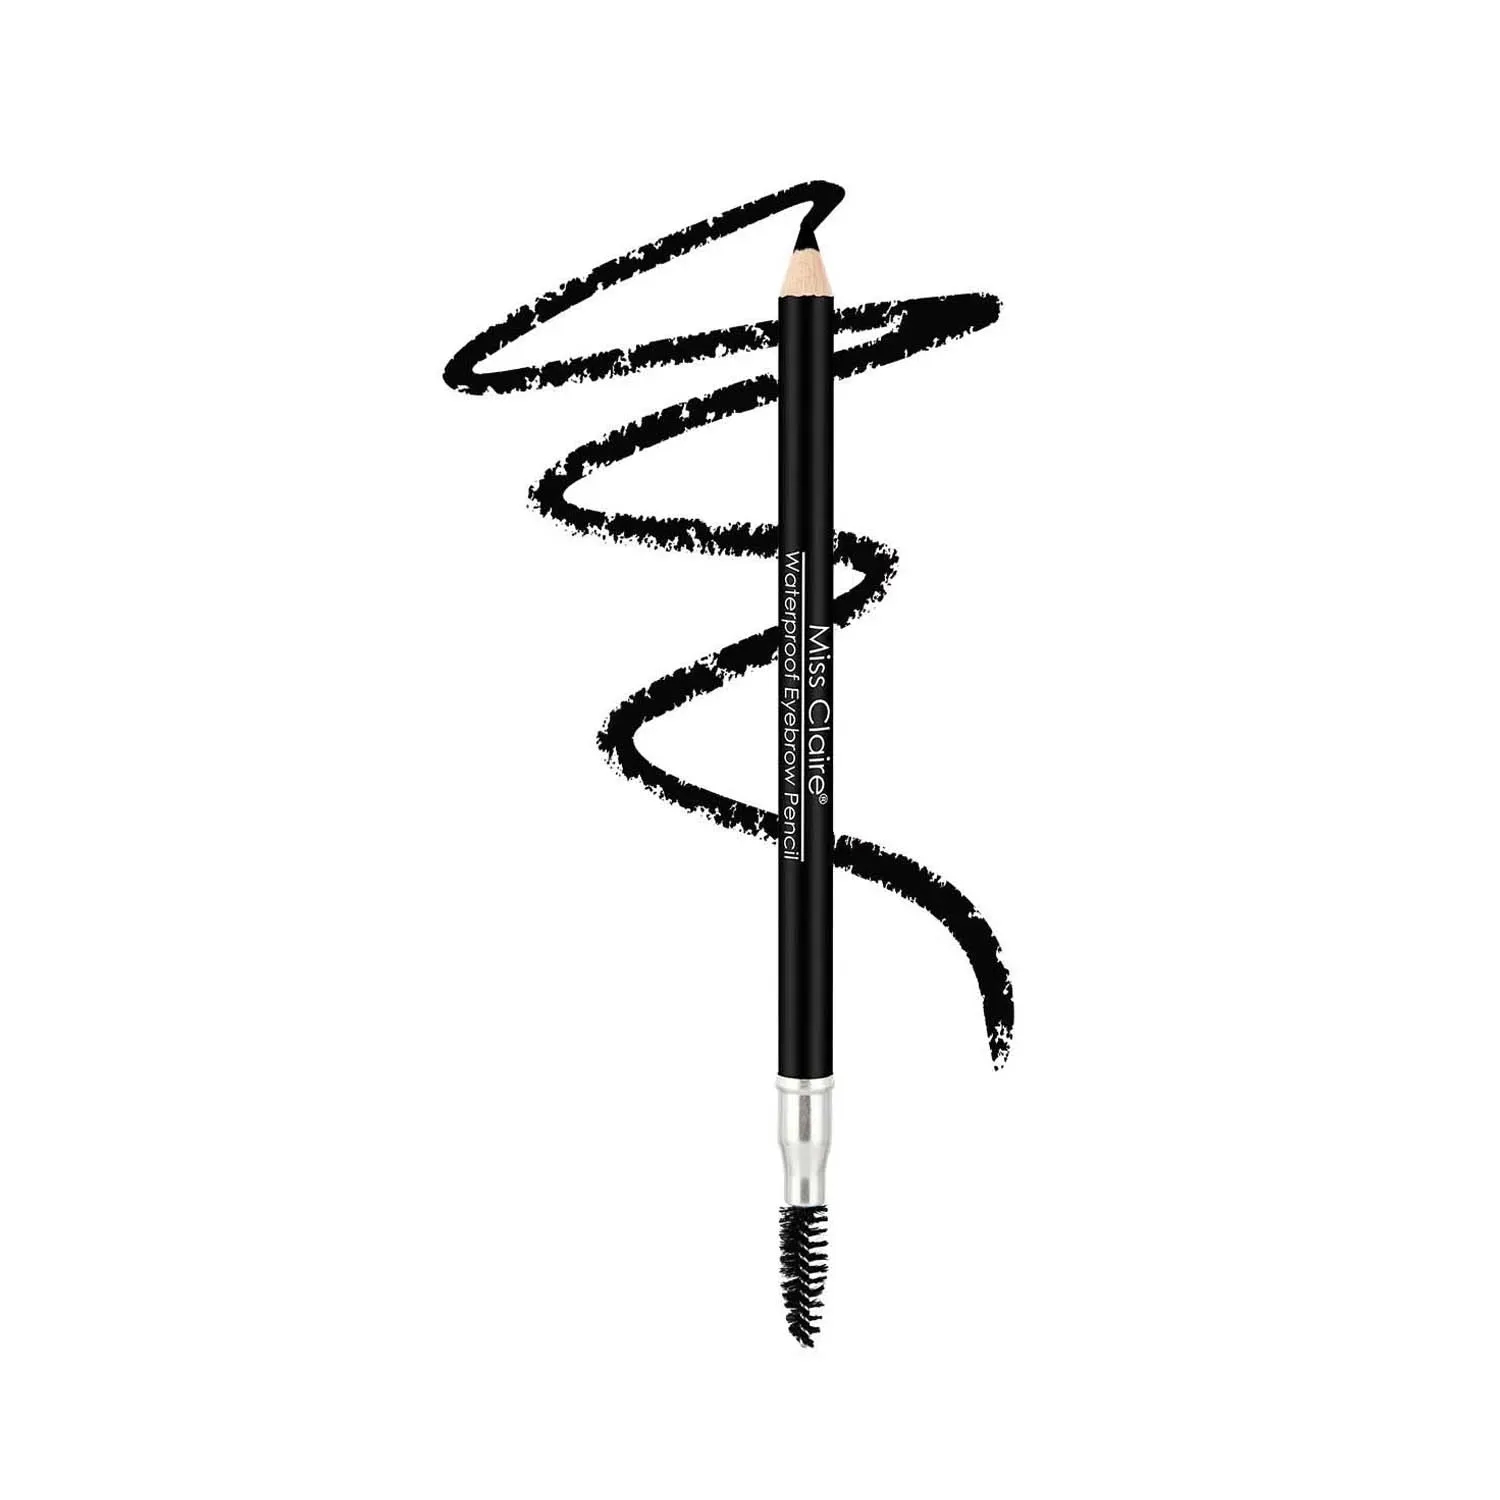 Miss Claire | Miss Claire Waterproof Eyebrow Pencil With Mascara Brush - 01 Black (1.4g)